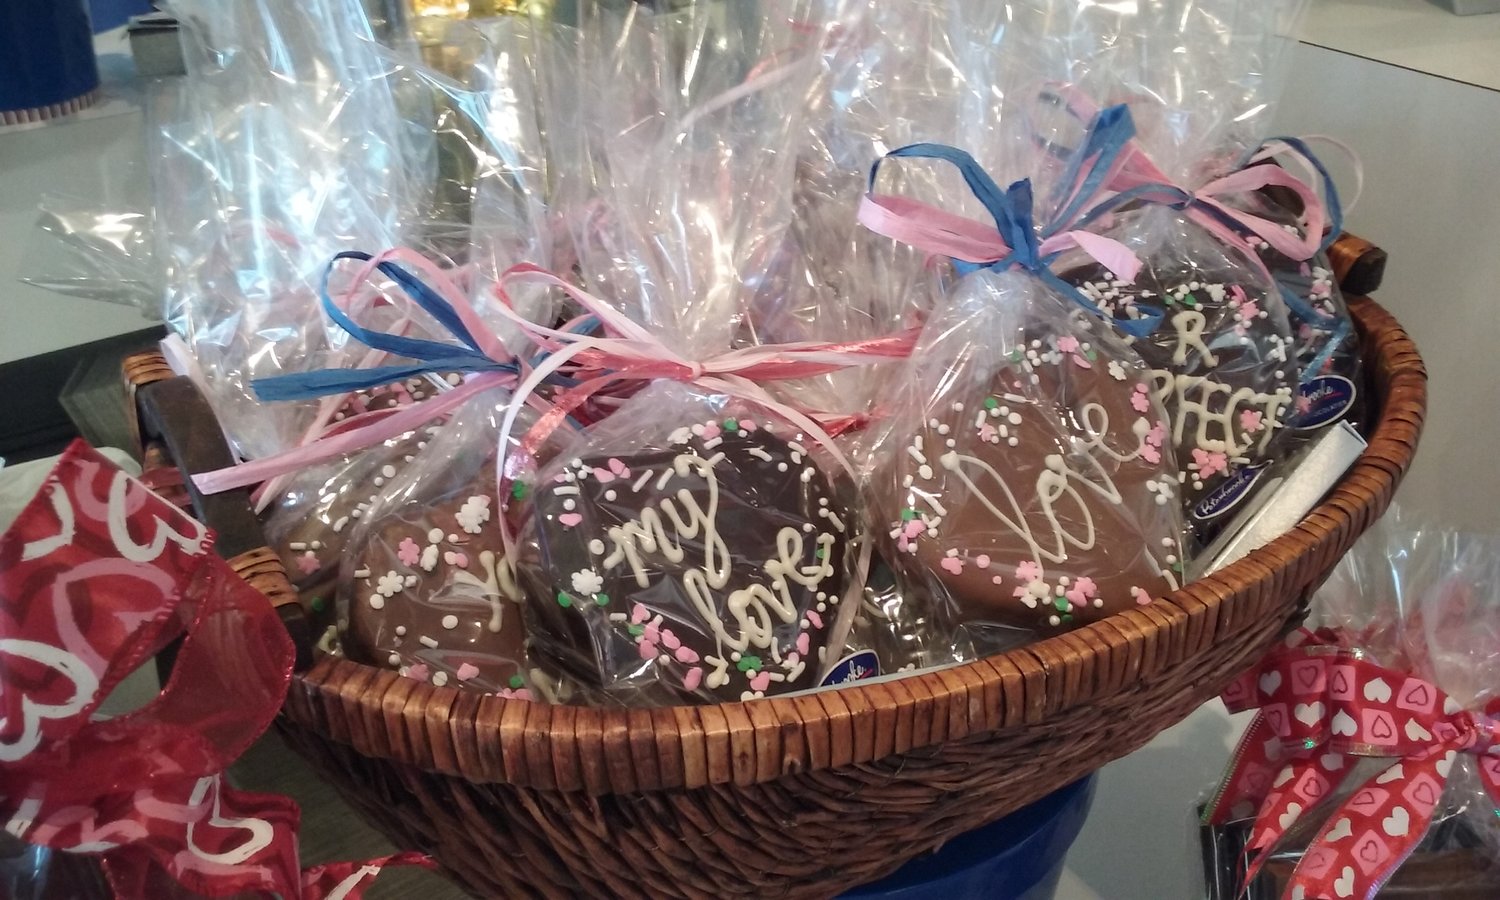 Chocolate hearts bearing romantic messages can be found at Peterbrooke Chocolatier.